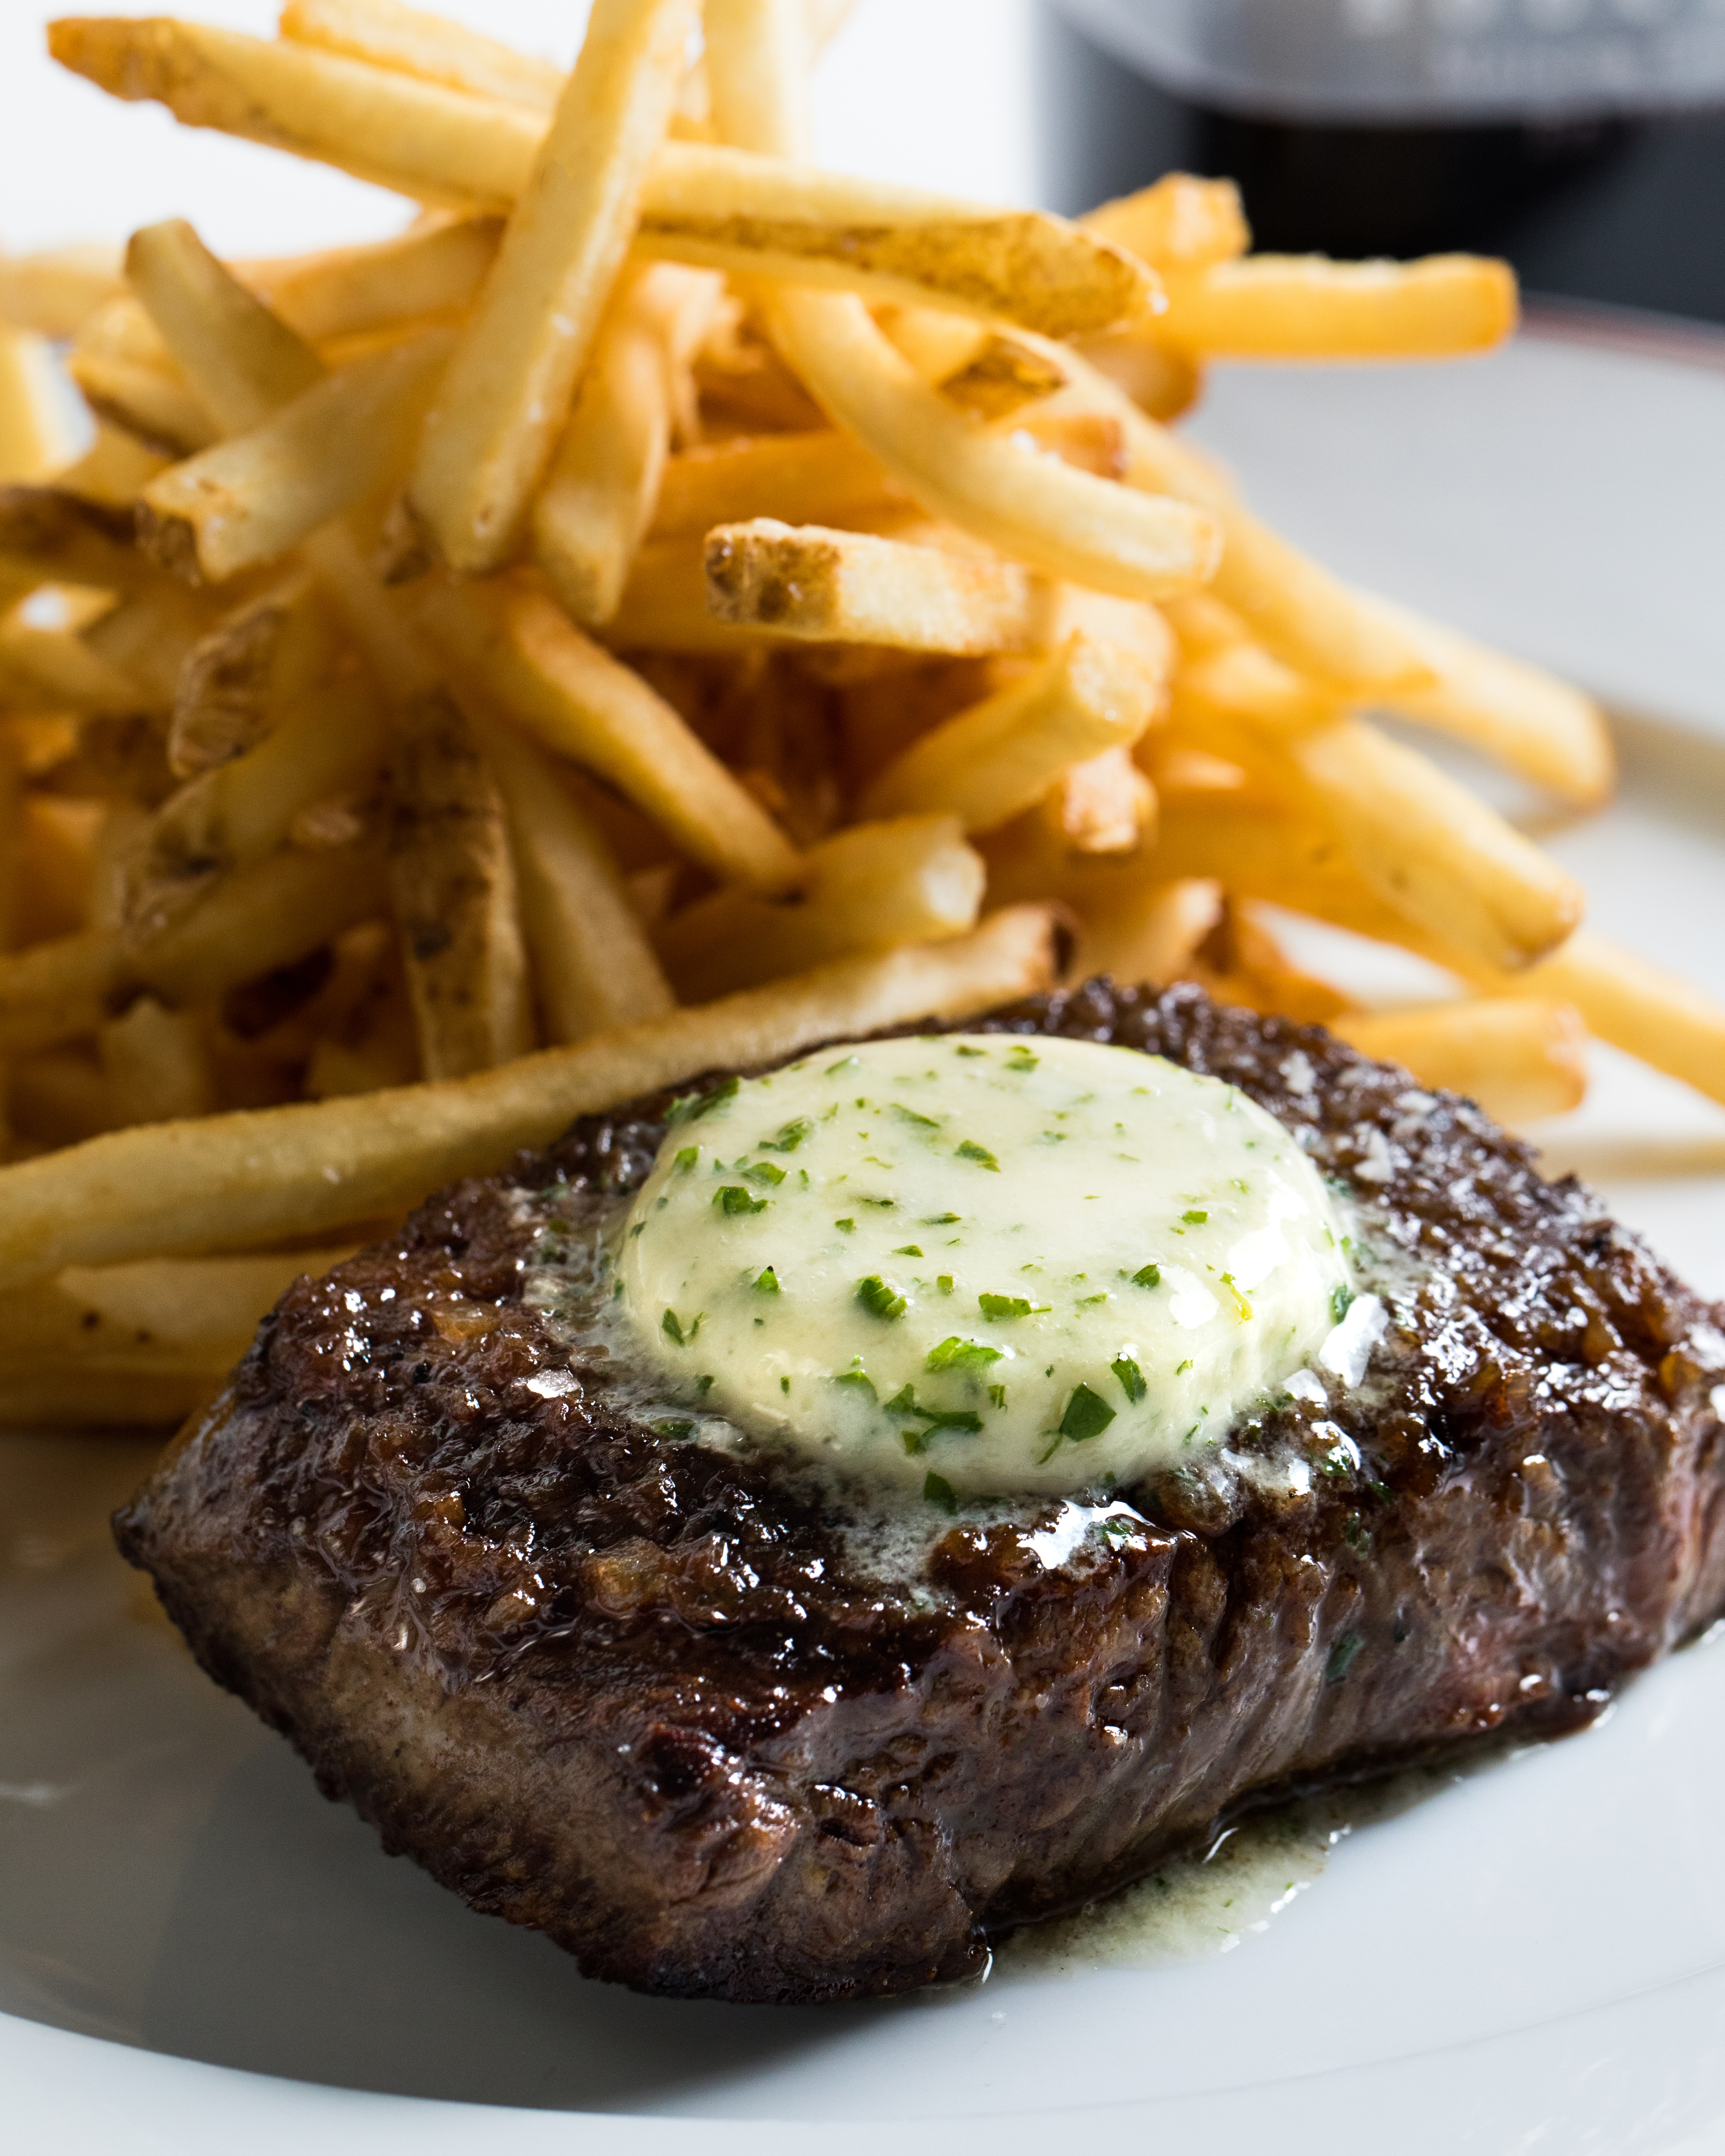 steak on plate with fries.